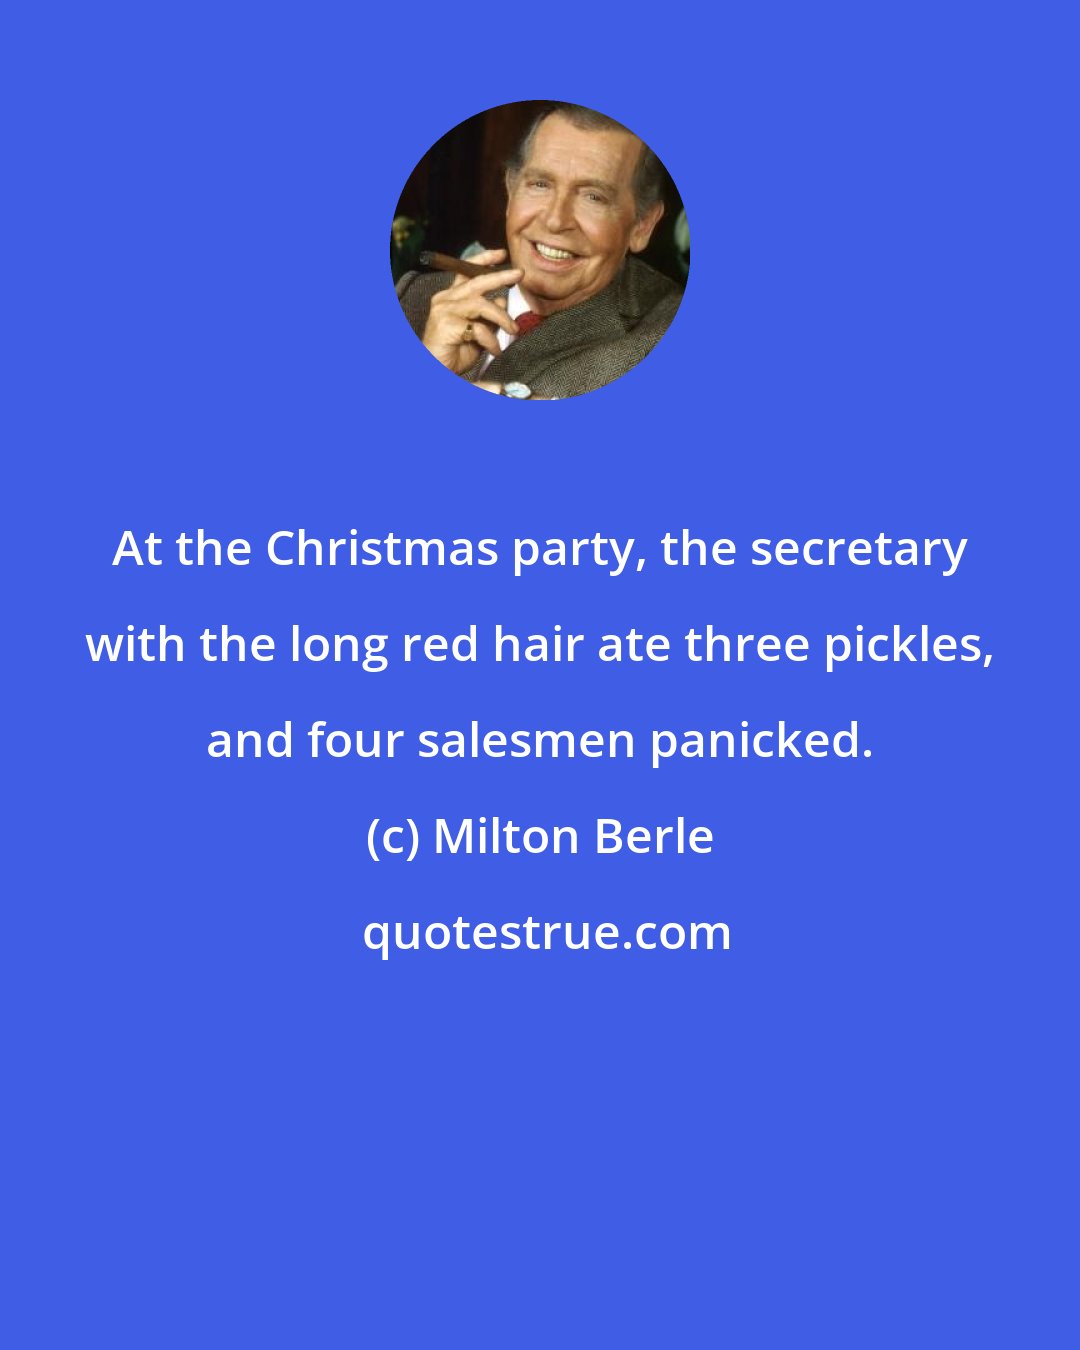 Milton Berle: At the Christmas party, the secretary with the long red hair ate three pickles, and four salesmen panicked.